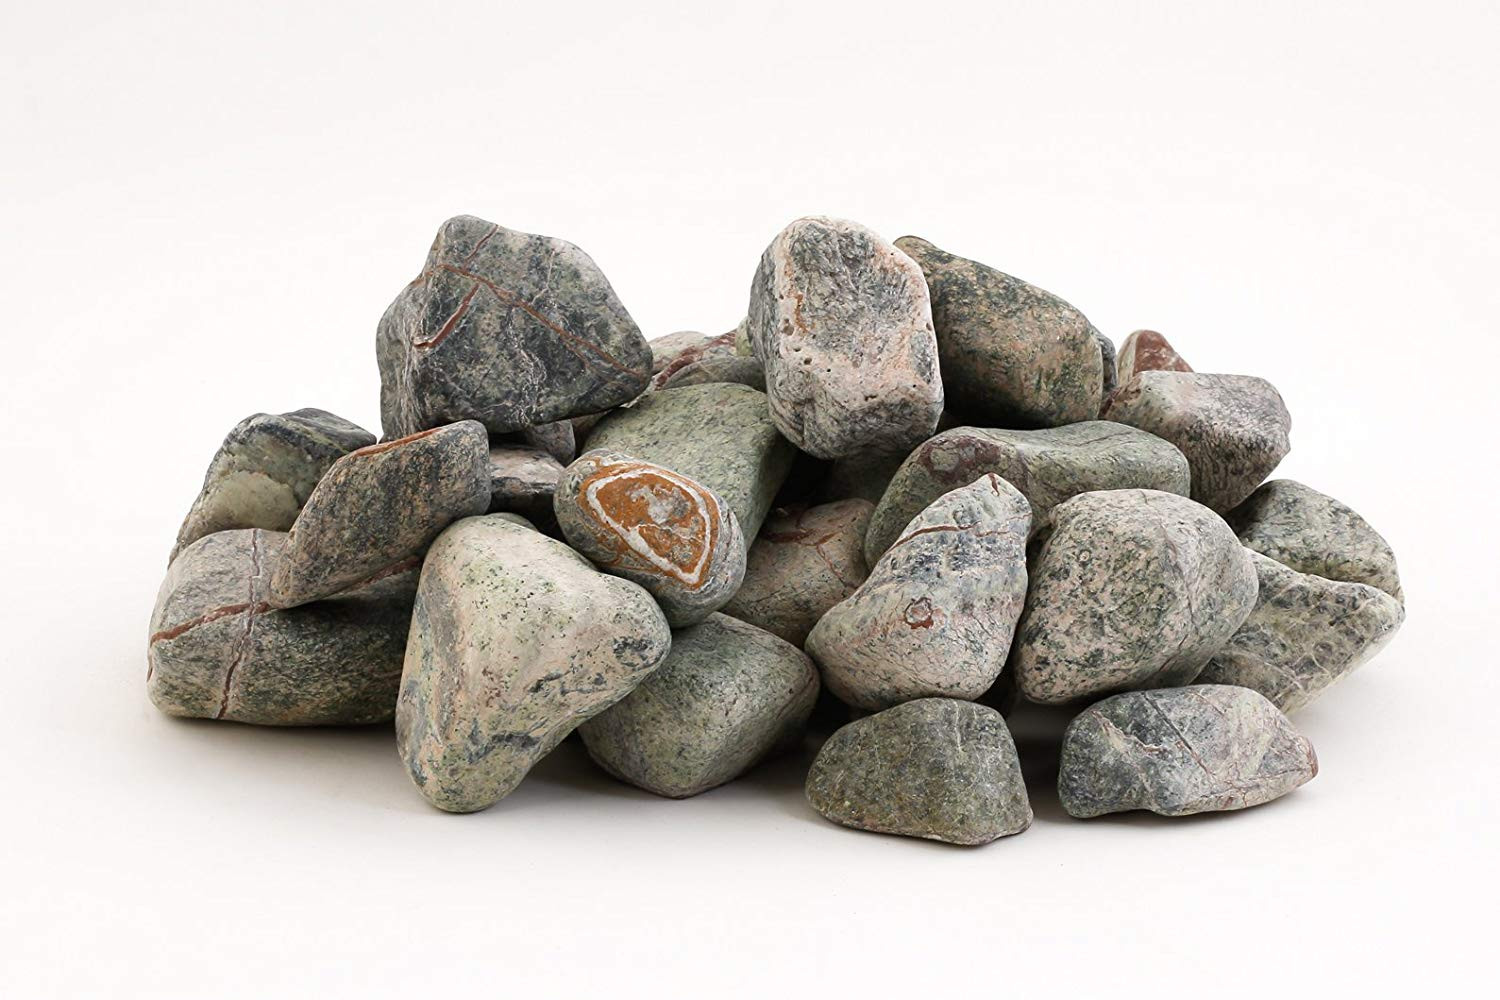 28 Fantastic Natural Stone Vase 2024 free download natural stone vase of pebbles stonestories rainforest green decorative landscaping and with pebbles stonestories rainforest green decorative landscaping and garden stone 0 9 kg 1 2 amazon in